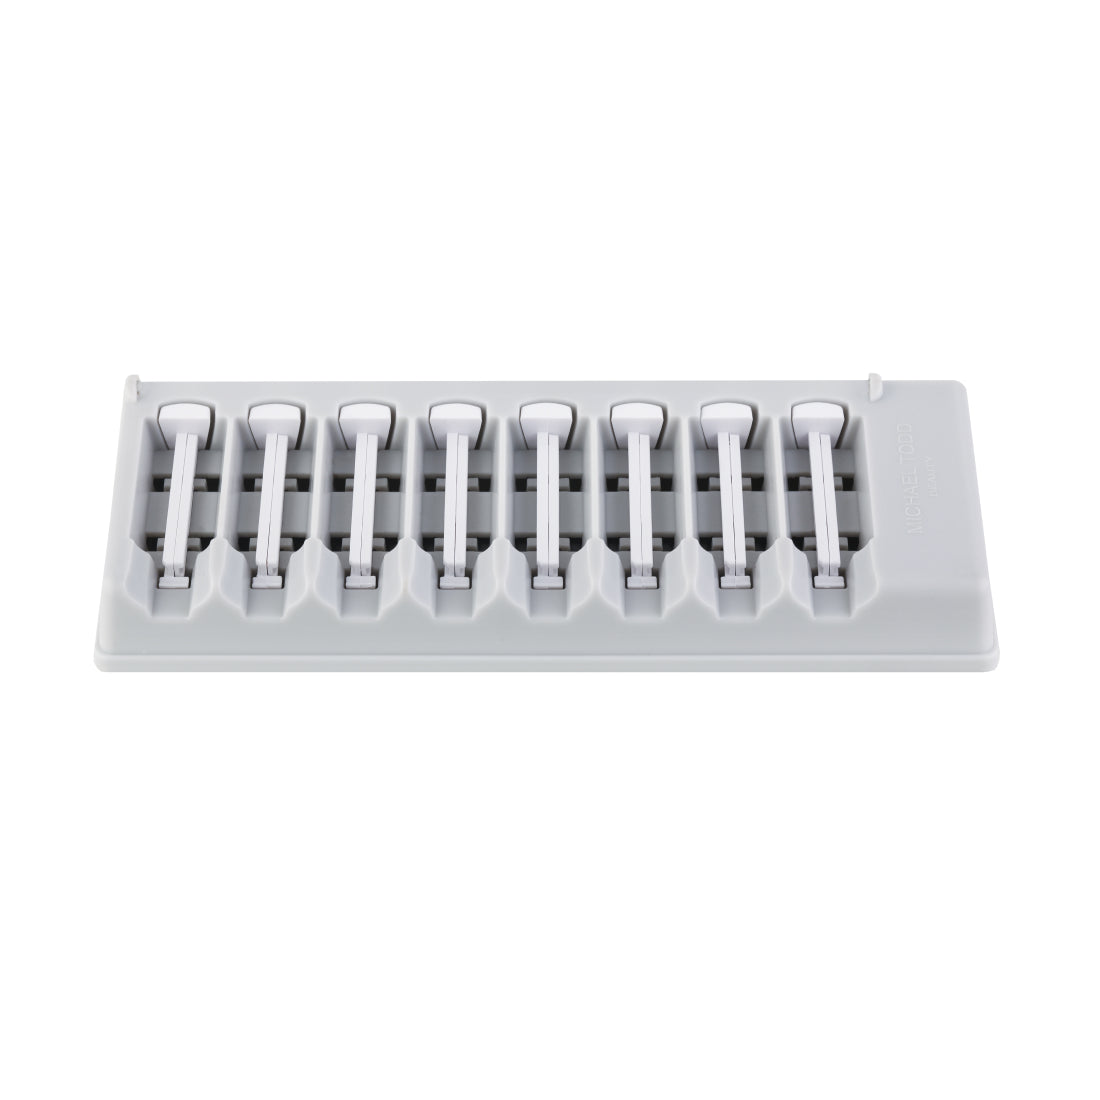 A gray ice cube tray with a white lid, featuring 8 compartments for making ice cubes, similar in precision to Michael Todd Beauty’s Sonicsmooth Refill Tips. 2 Month Supply